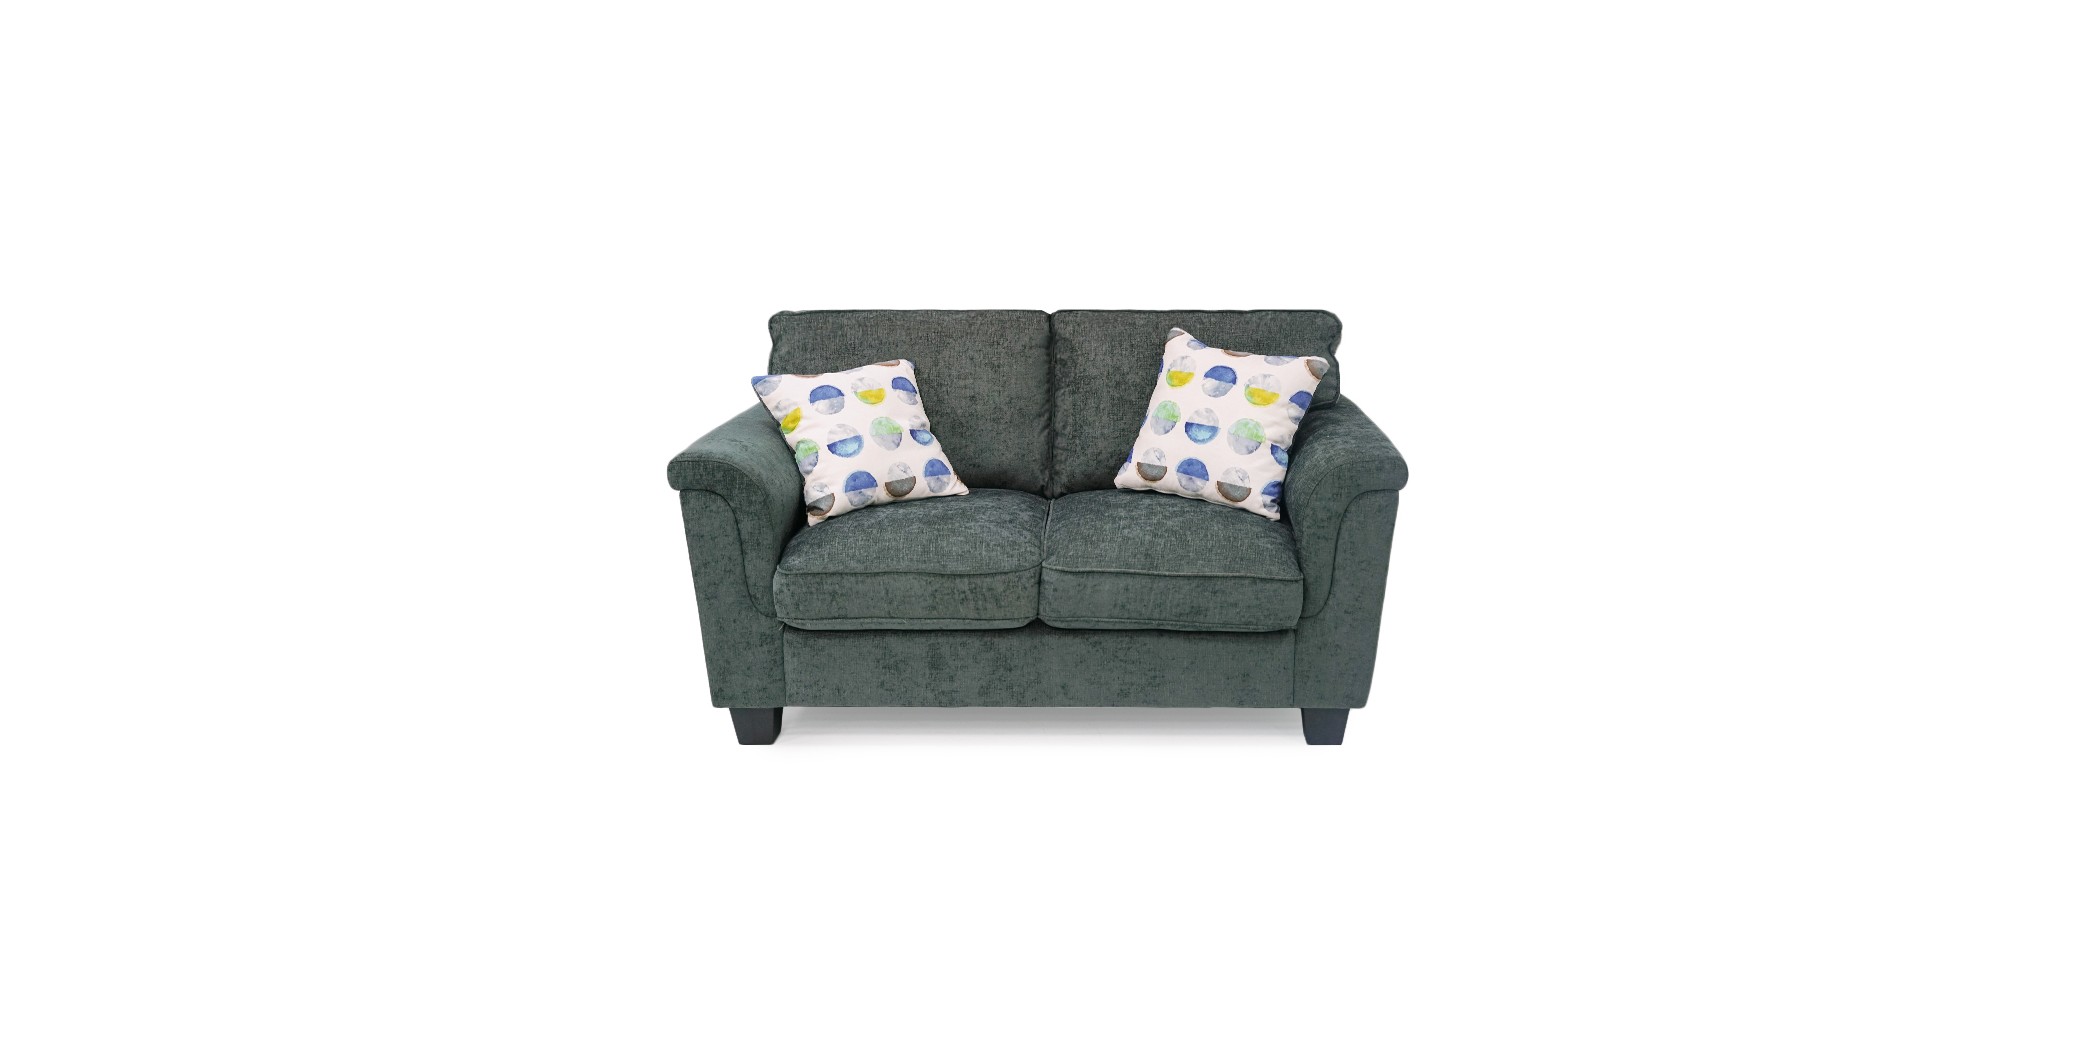 Alicia 2 Seater Sorrento Pewter Col Fabric